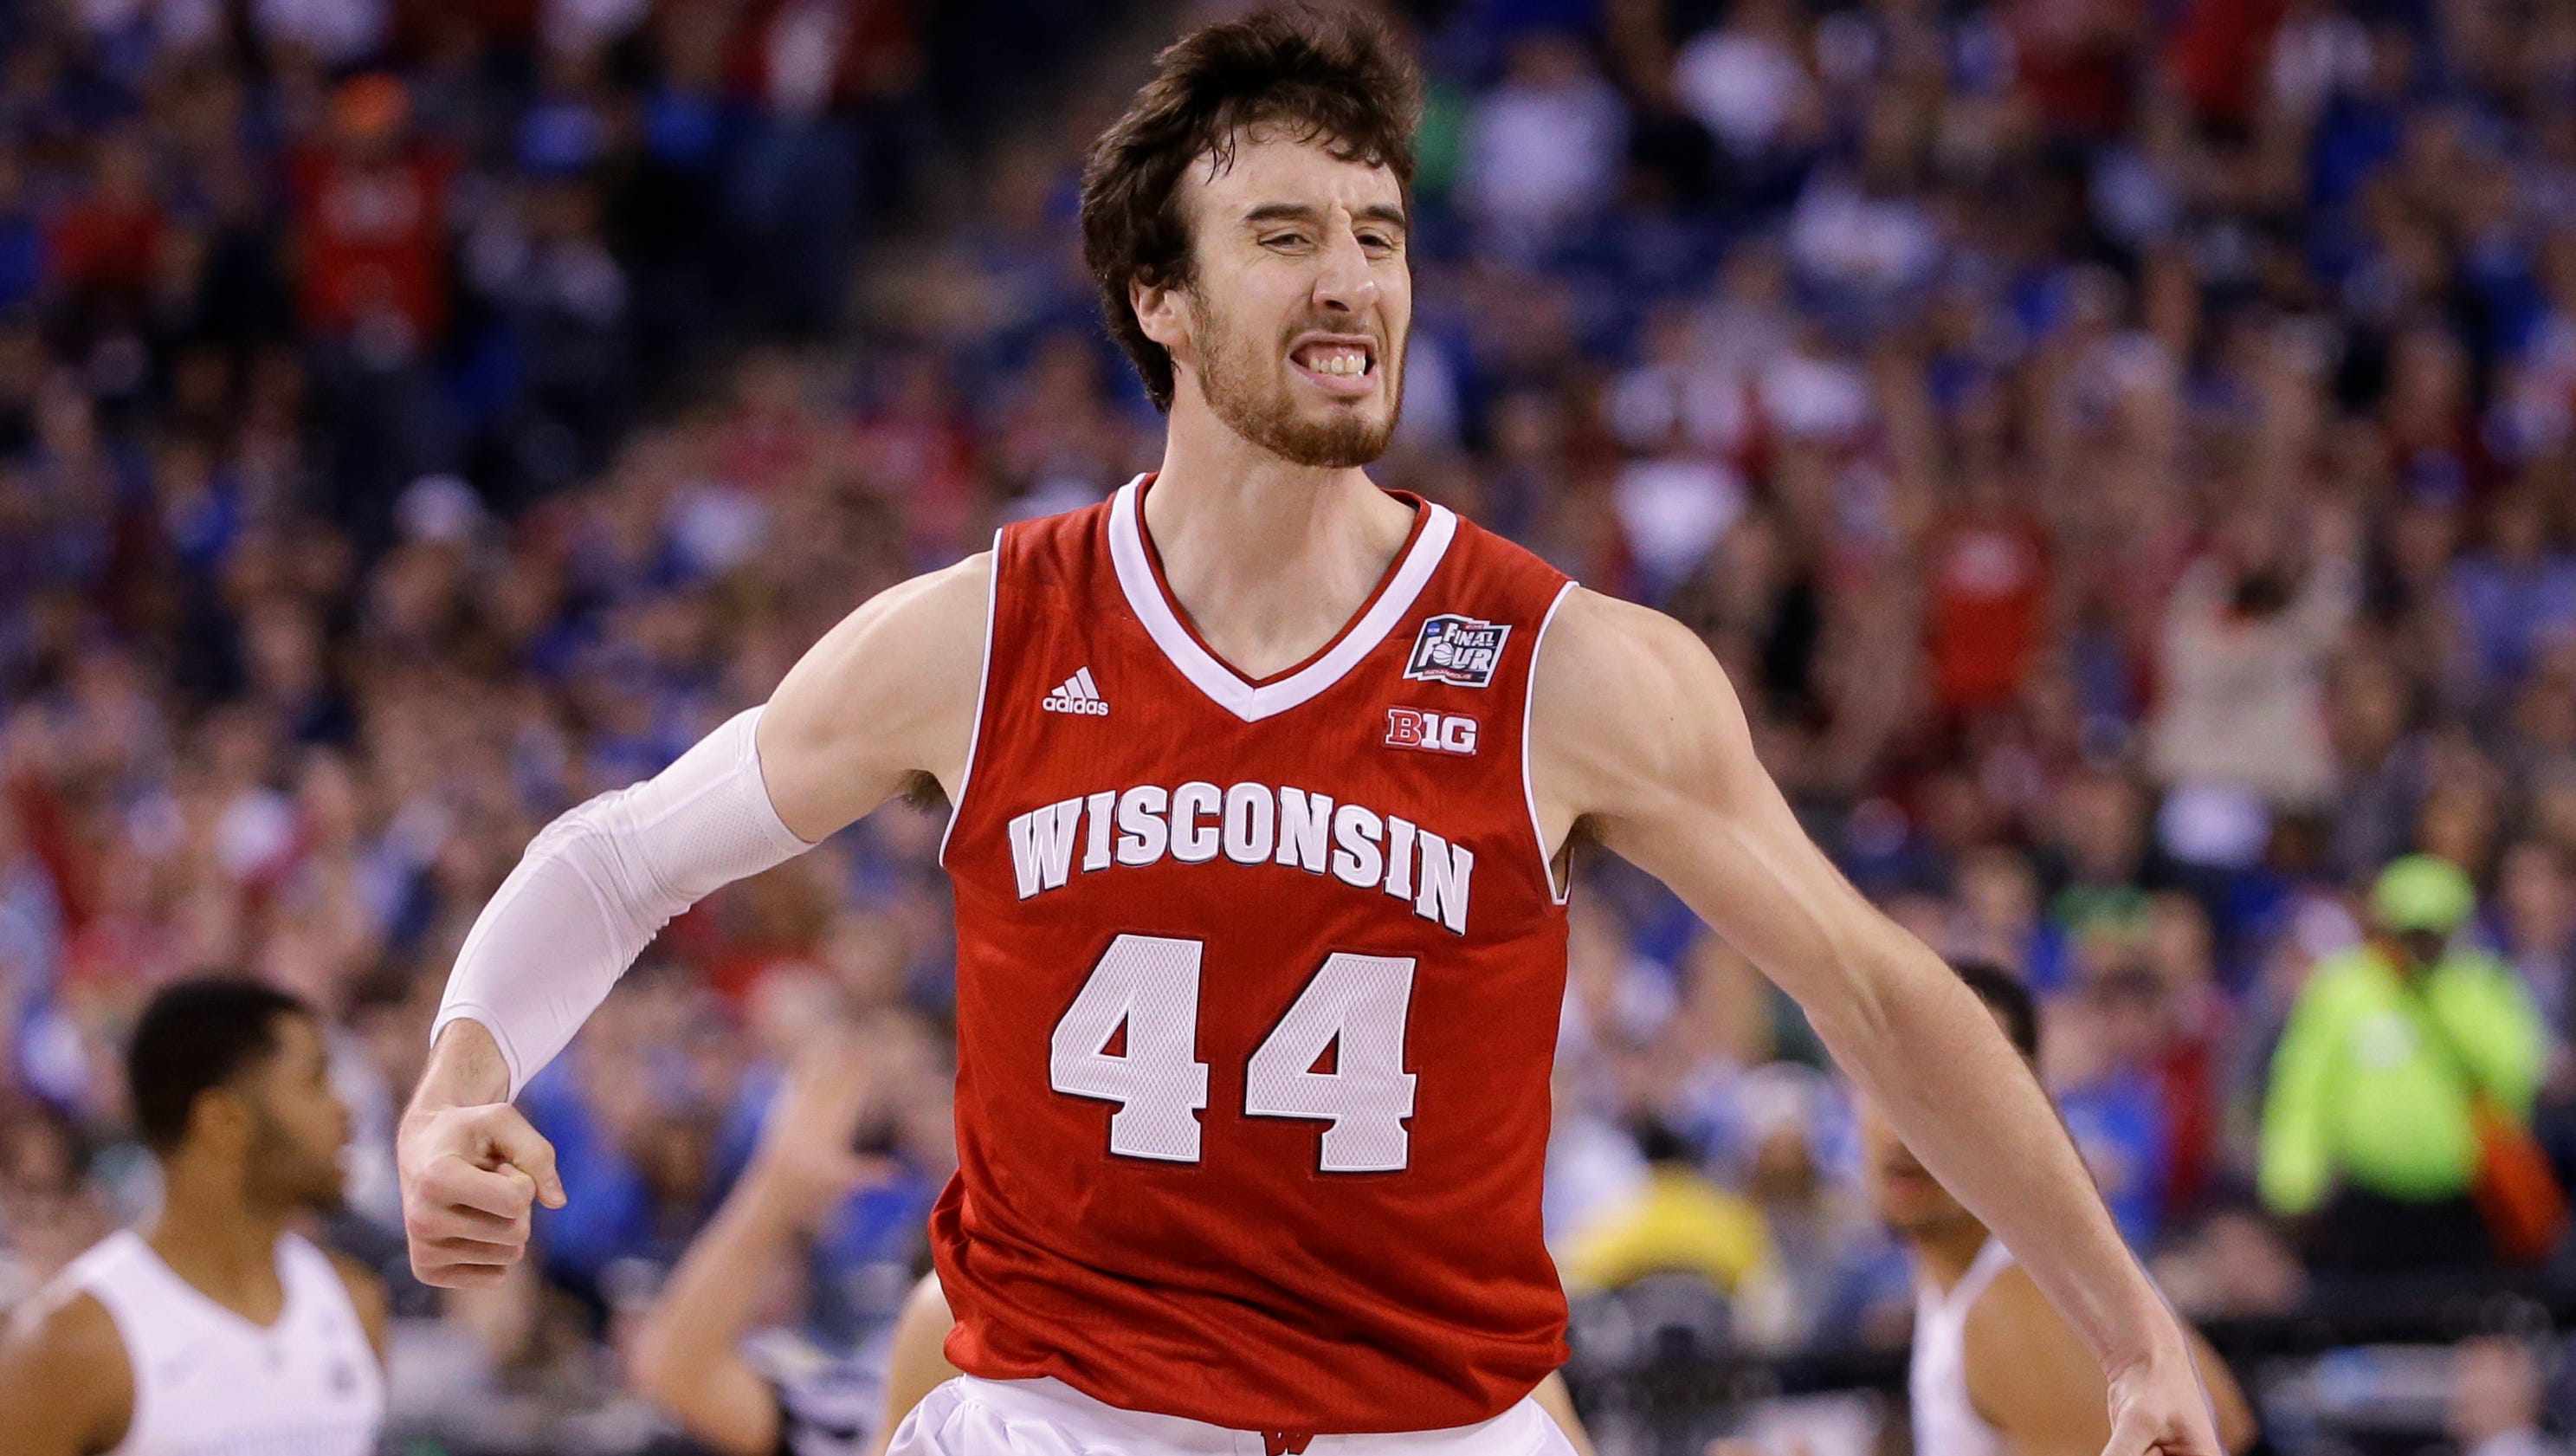 Frank Kaminsky's greatest hits as a member of Wisconsin Badgers family